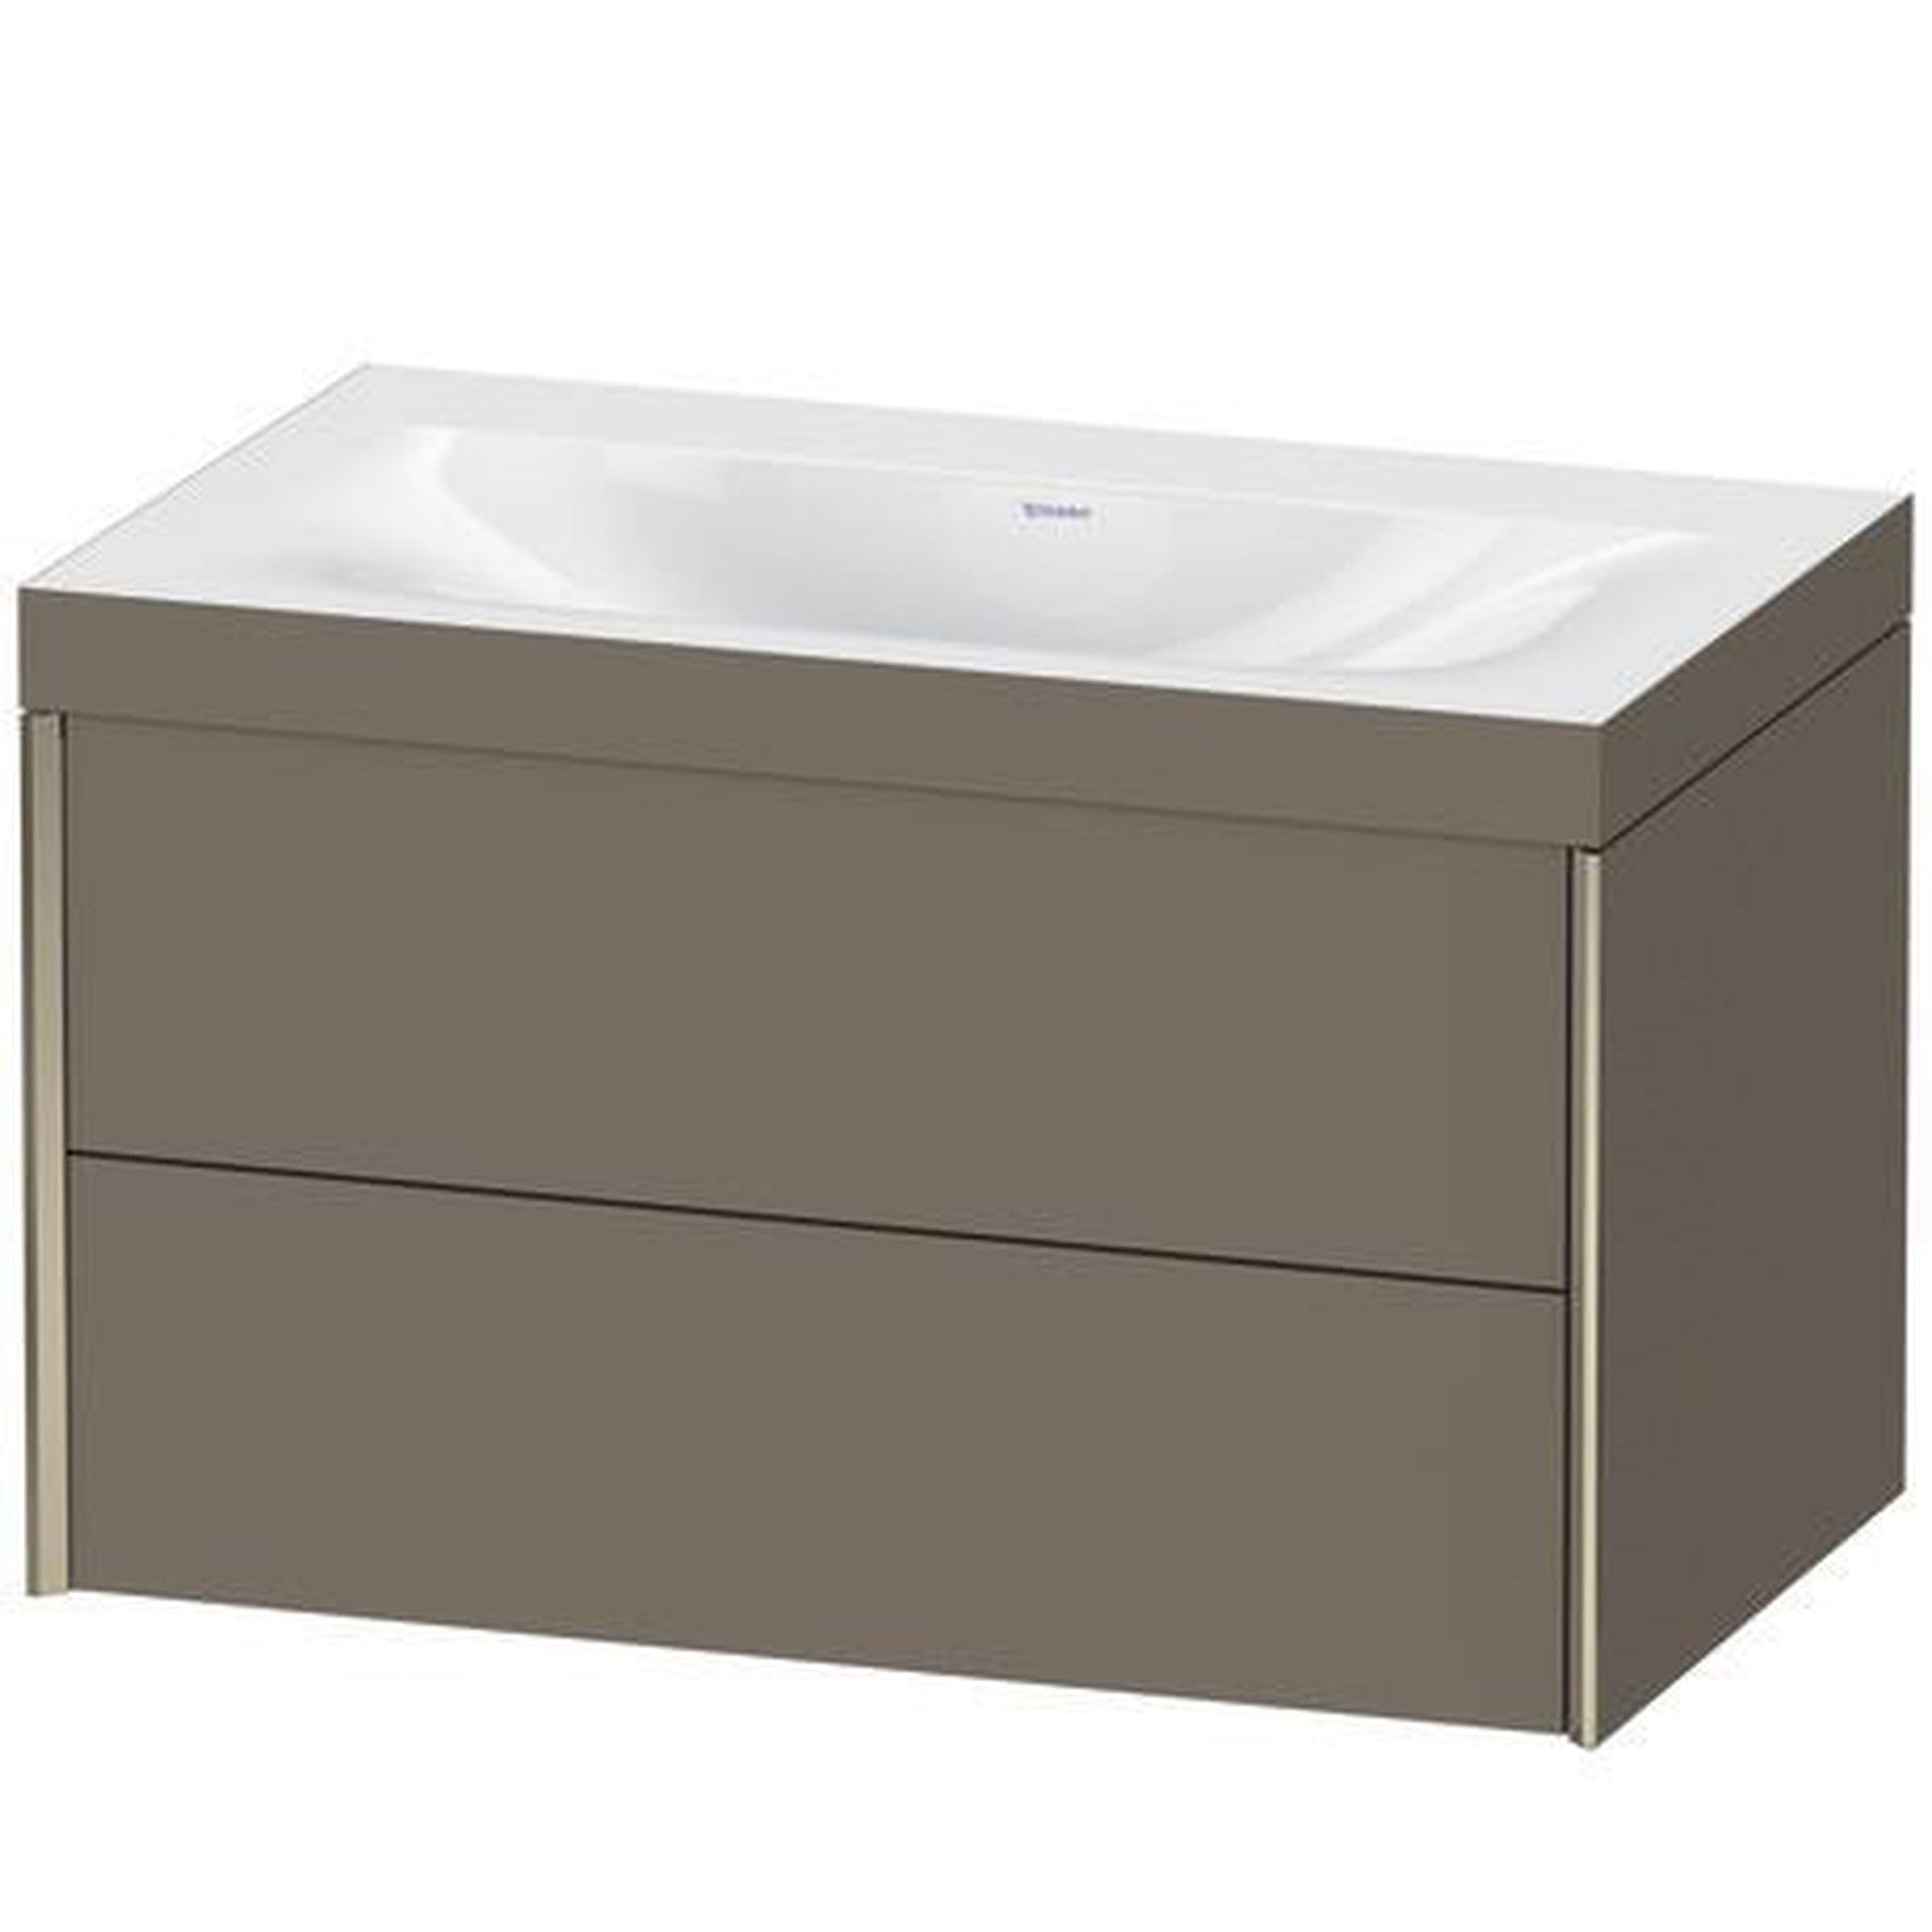 Duravit Xviu 31" x 20" x 19" Two Drawer C-Bonded Wall-Mount Vanity Kit Without Tap Hole, Flannel Gray (XV4615NB190C)